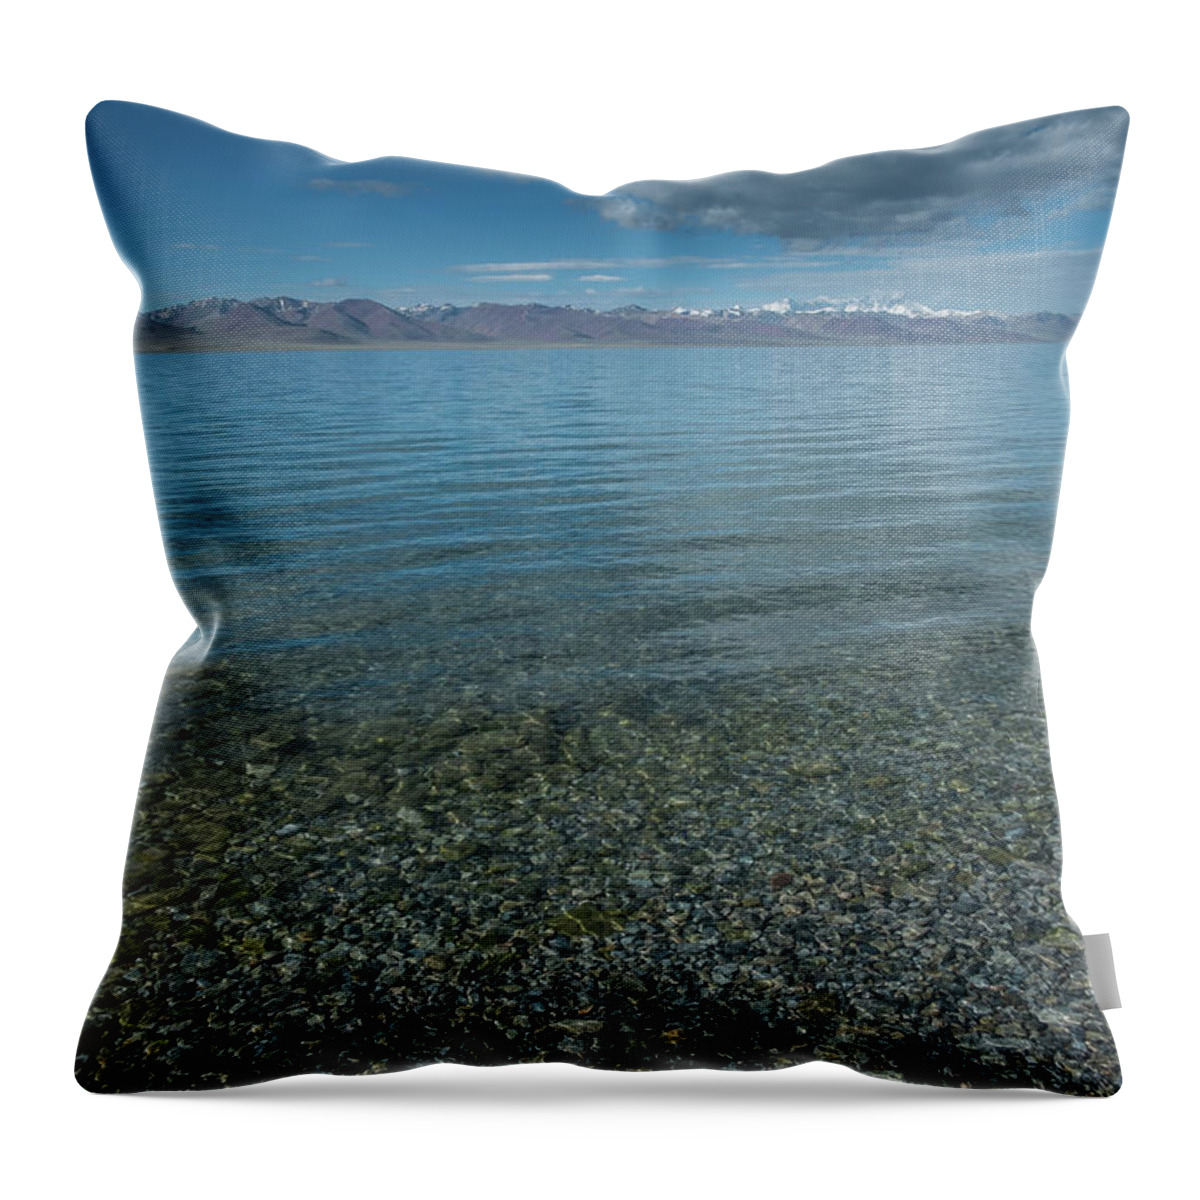 Tranquility Throw Pillow featuring the photograph Highland Lake God Namco by Zhongjia's Image